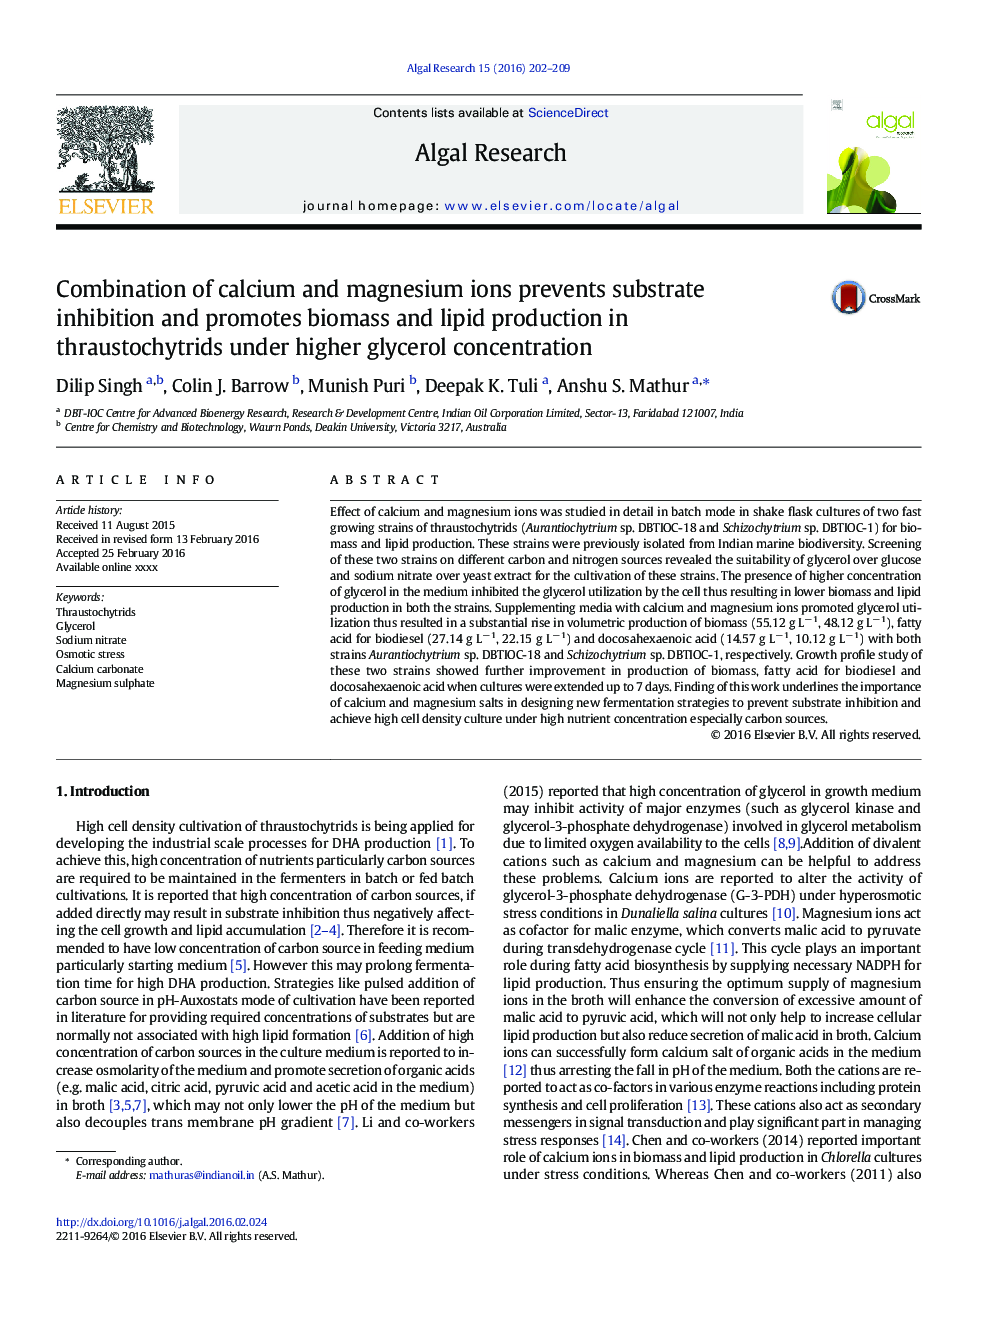 Combination of calcium and magnesium ions prevents substrate inhibition and promotes biomass and lipid production in thraustochytrids under higher glycerol concentration